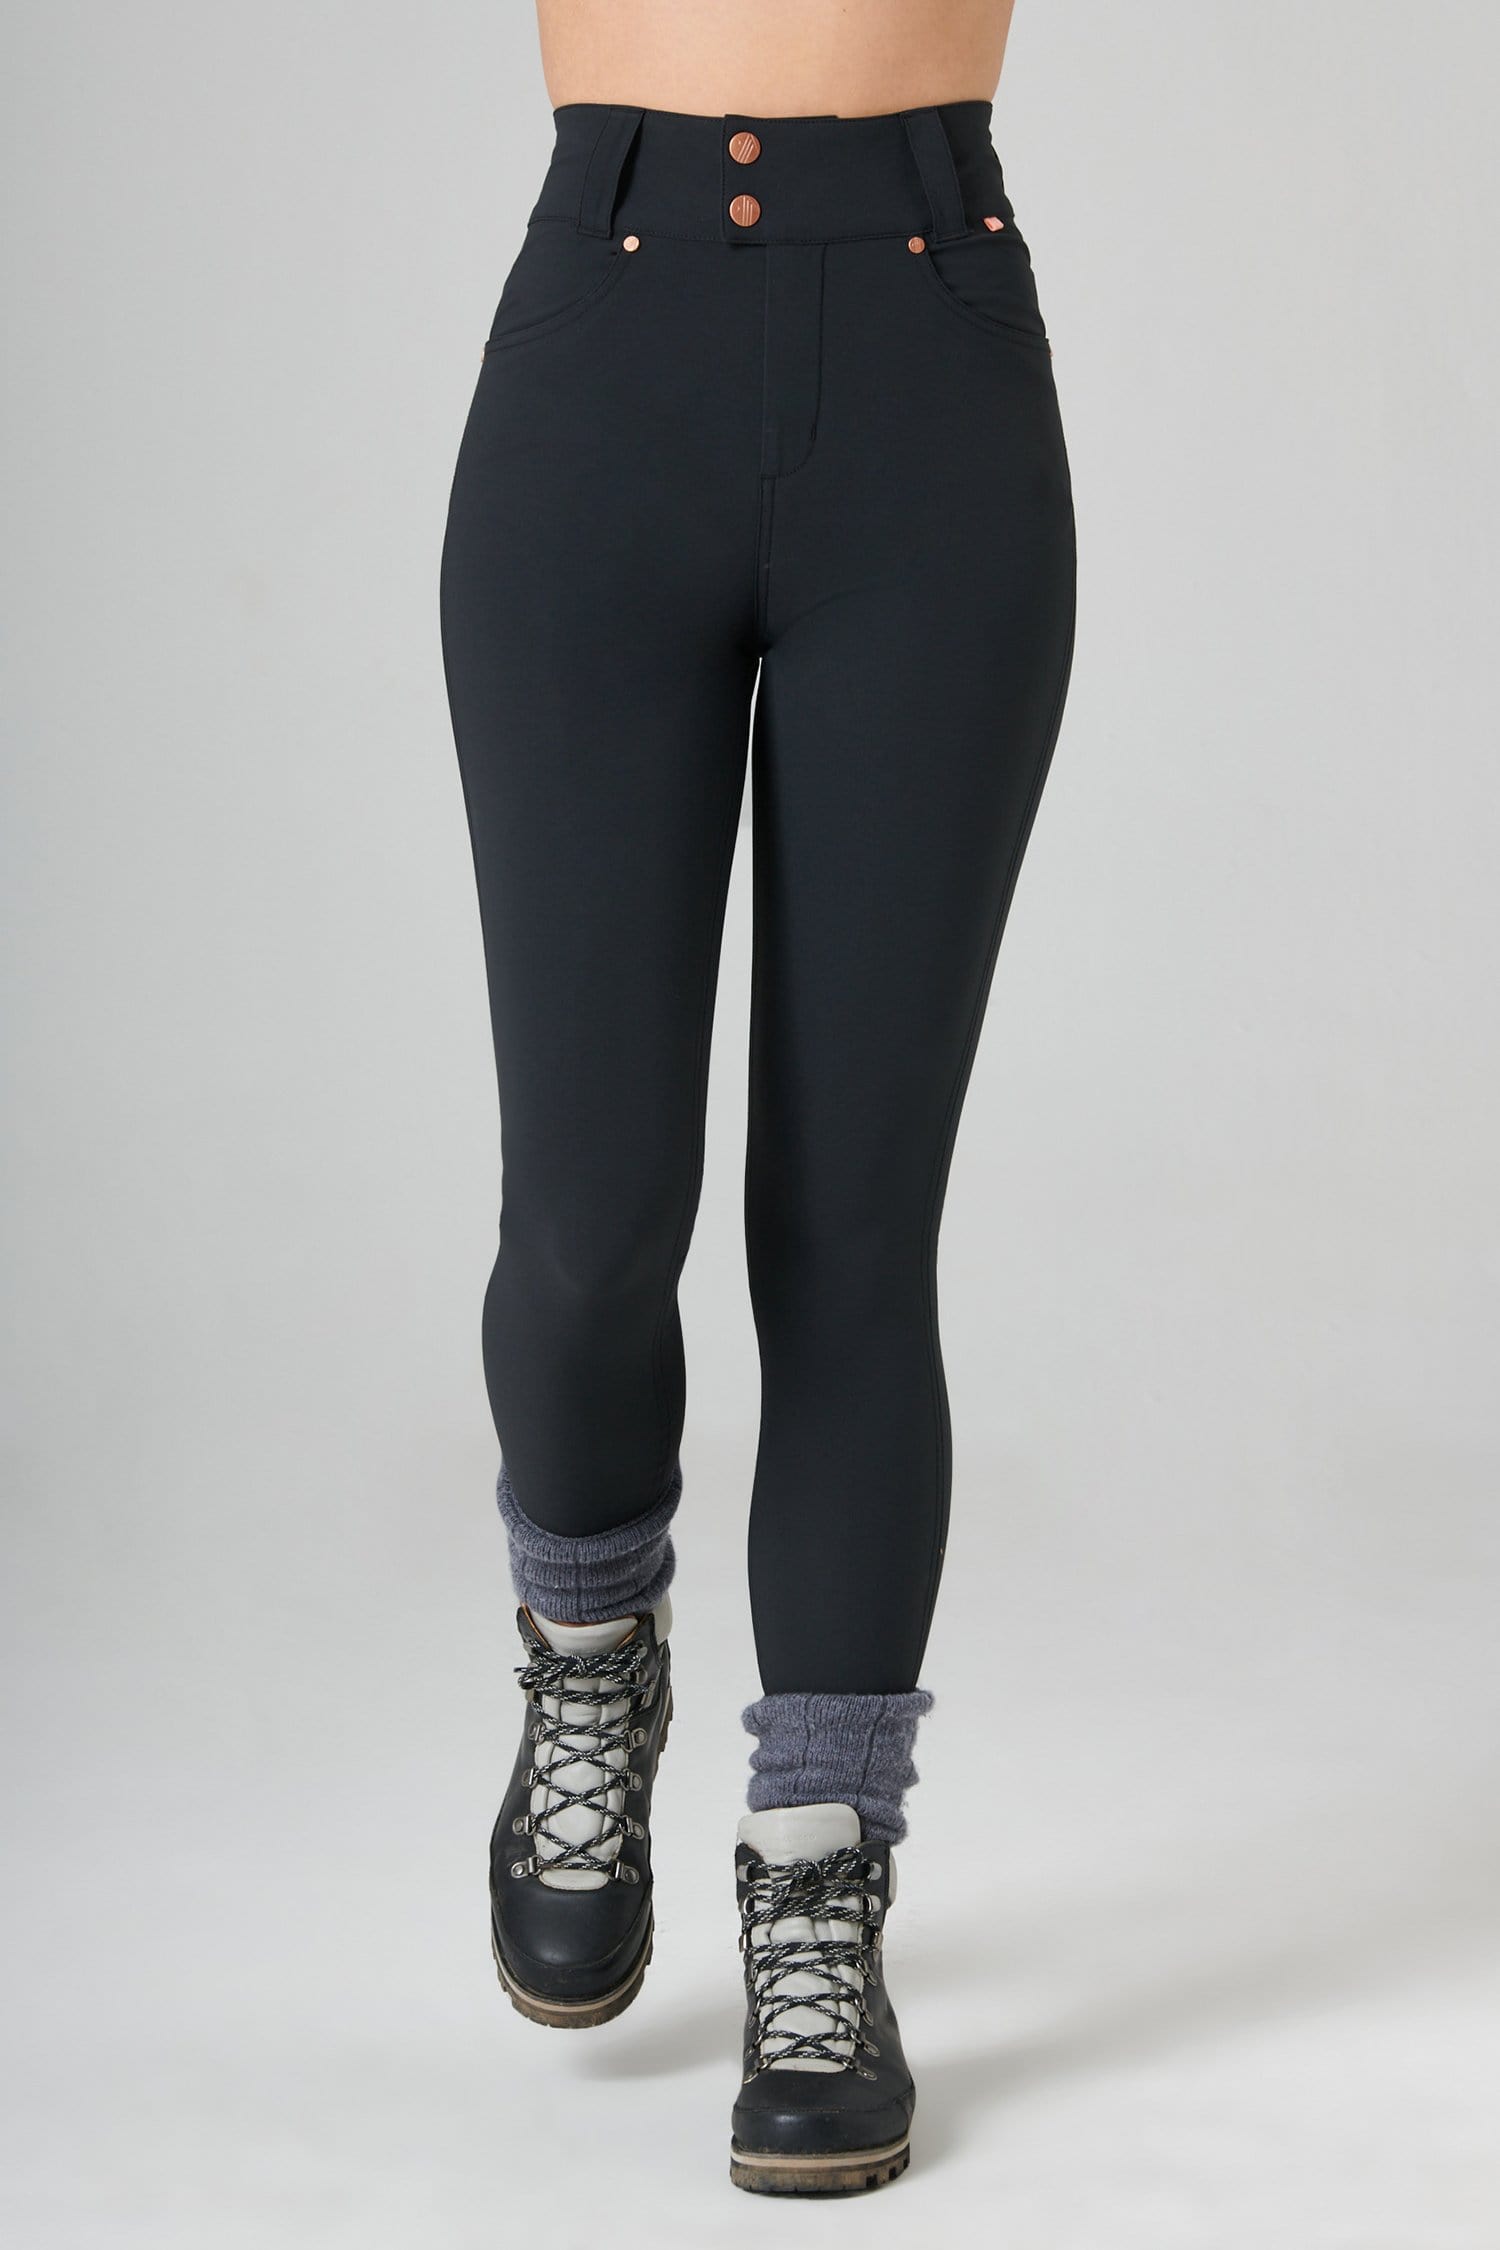 The Shape Skinny Outdoor Trousers - Black - 38r / Uk20 - Womens - Acai Outdoorwear